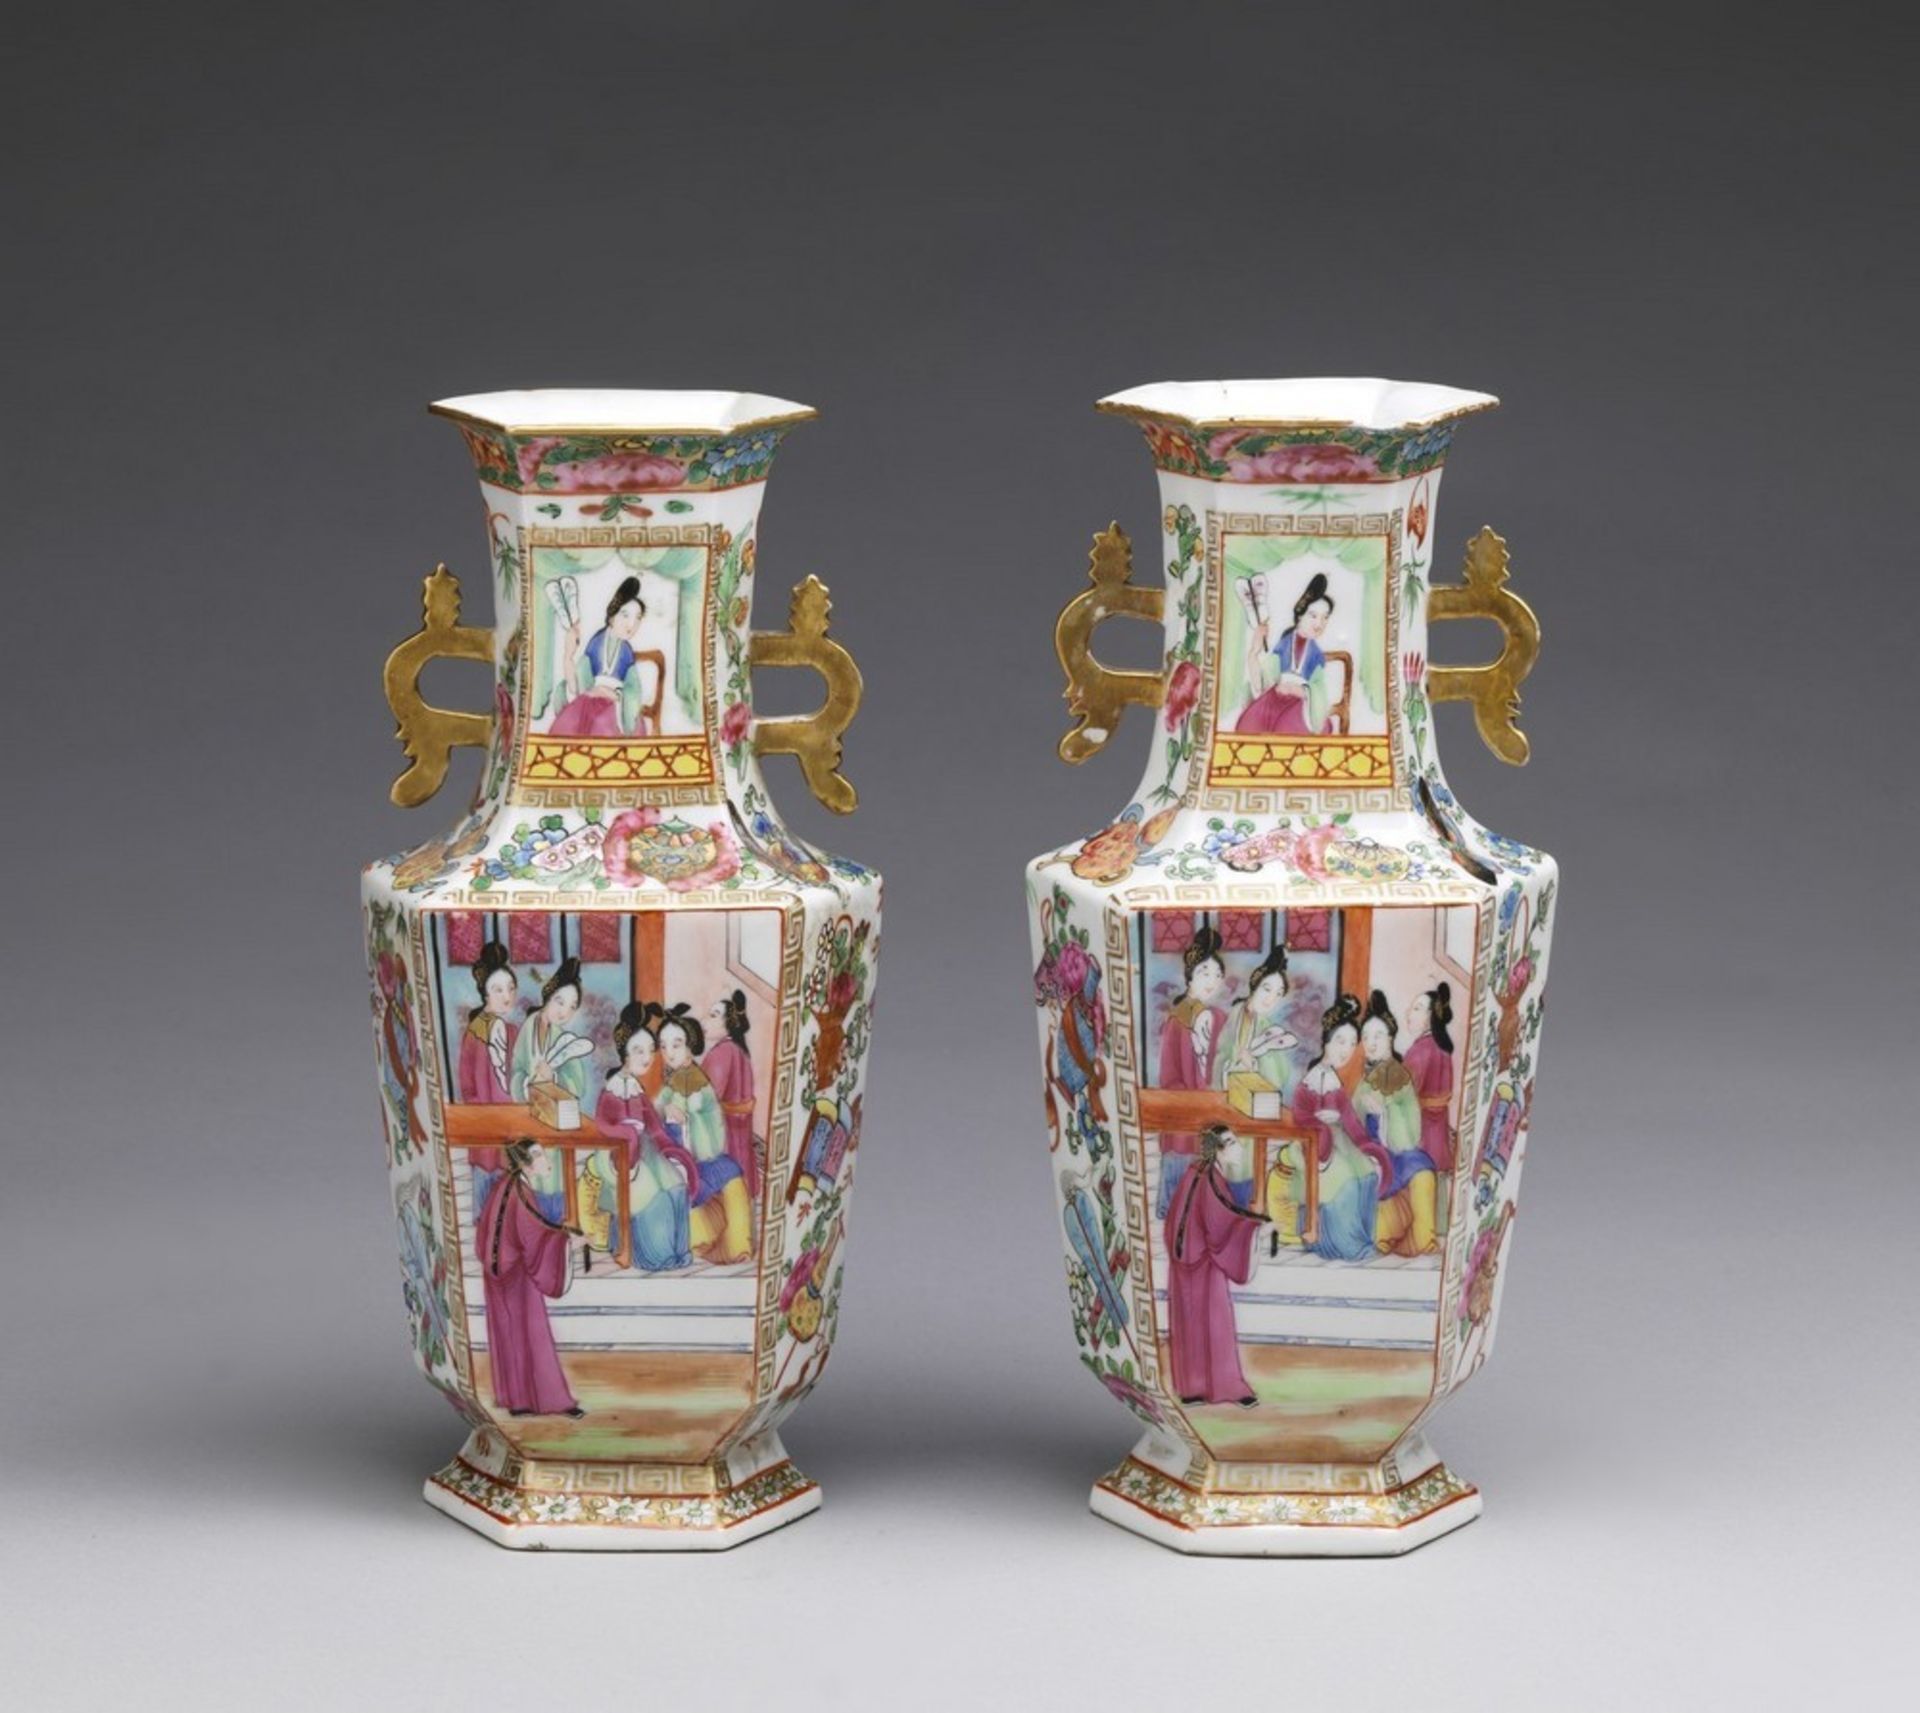 Arte Cinese A pair of porcelain Canton faceted vasesChina, Qing dynasty, early 19th century . - Image 4 of 4